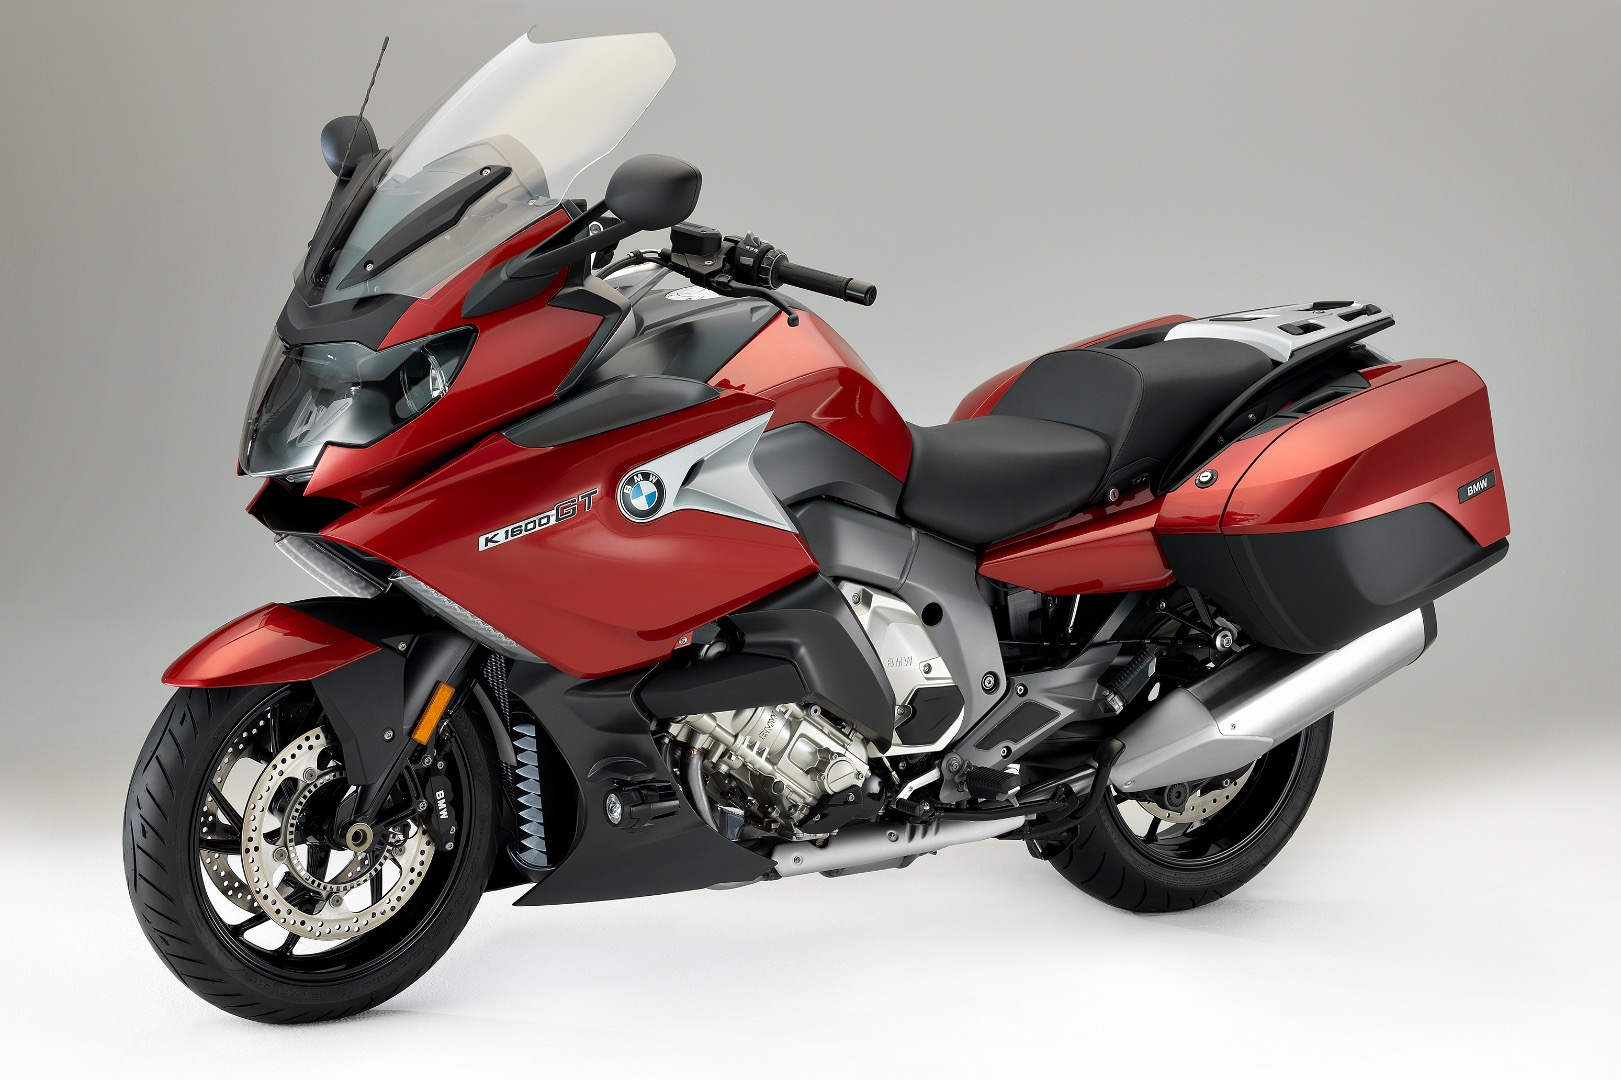 Review of BMW K 1600 GT 2017 pictures, live photos